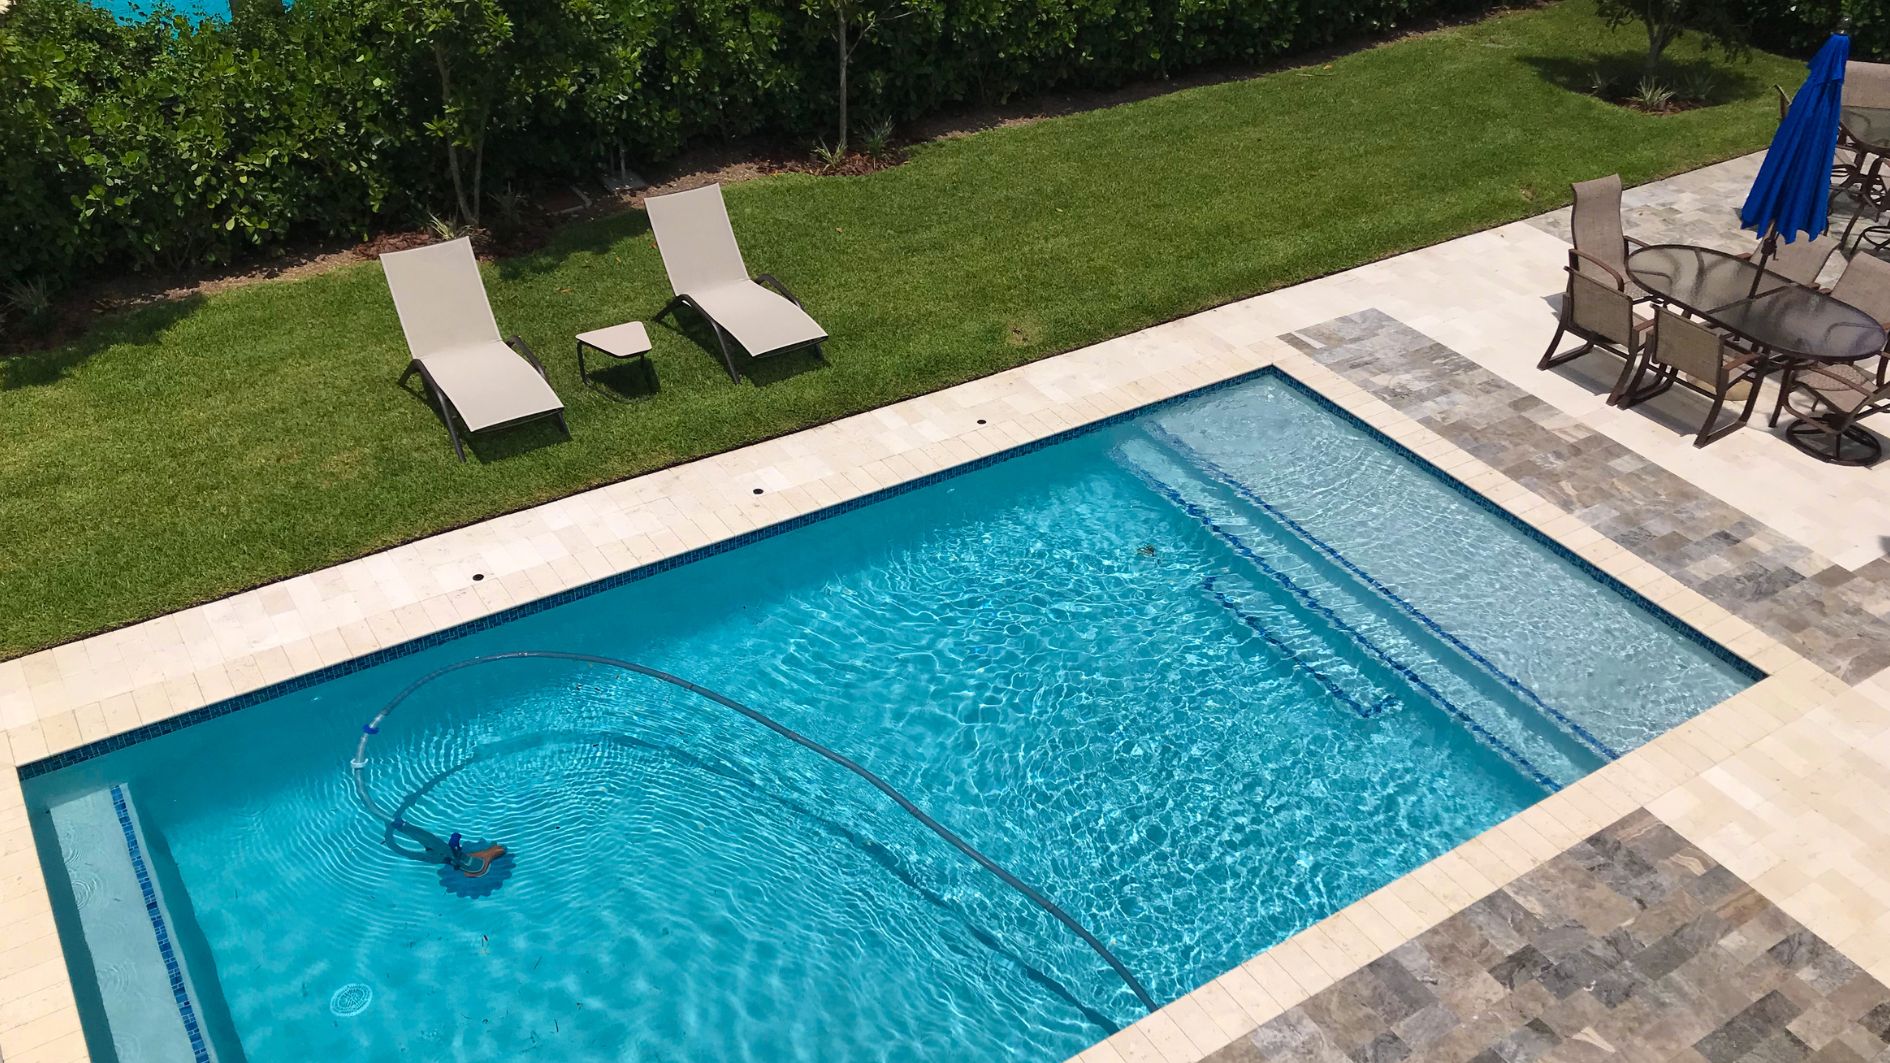 Pool Homes for Sale in New Braunfels